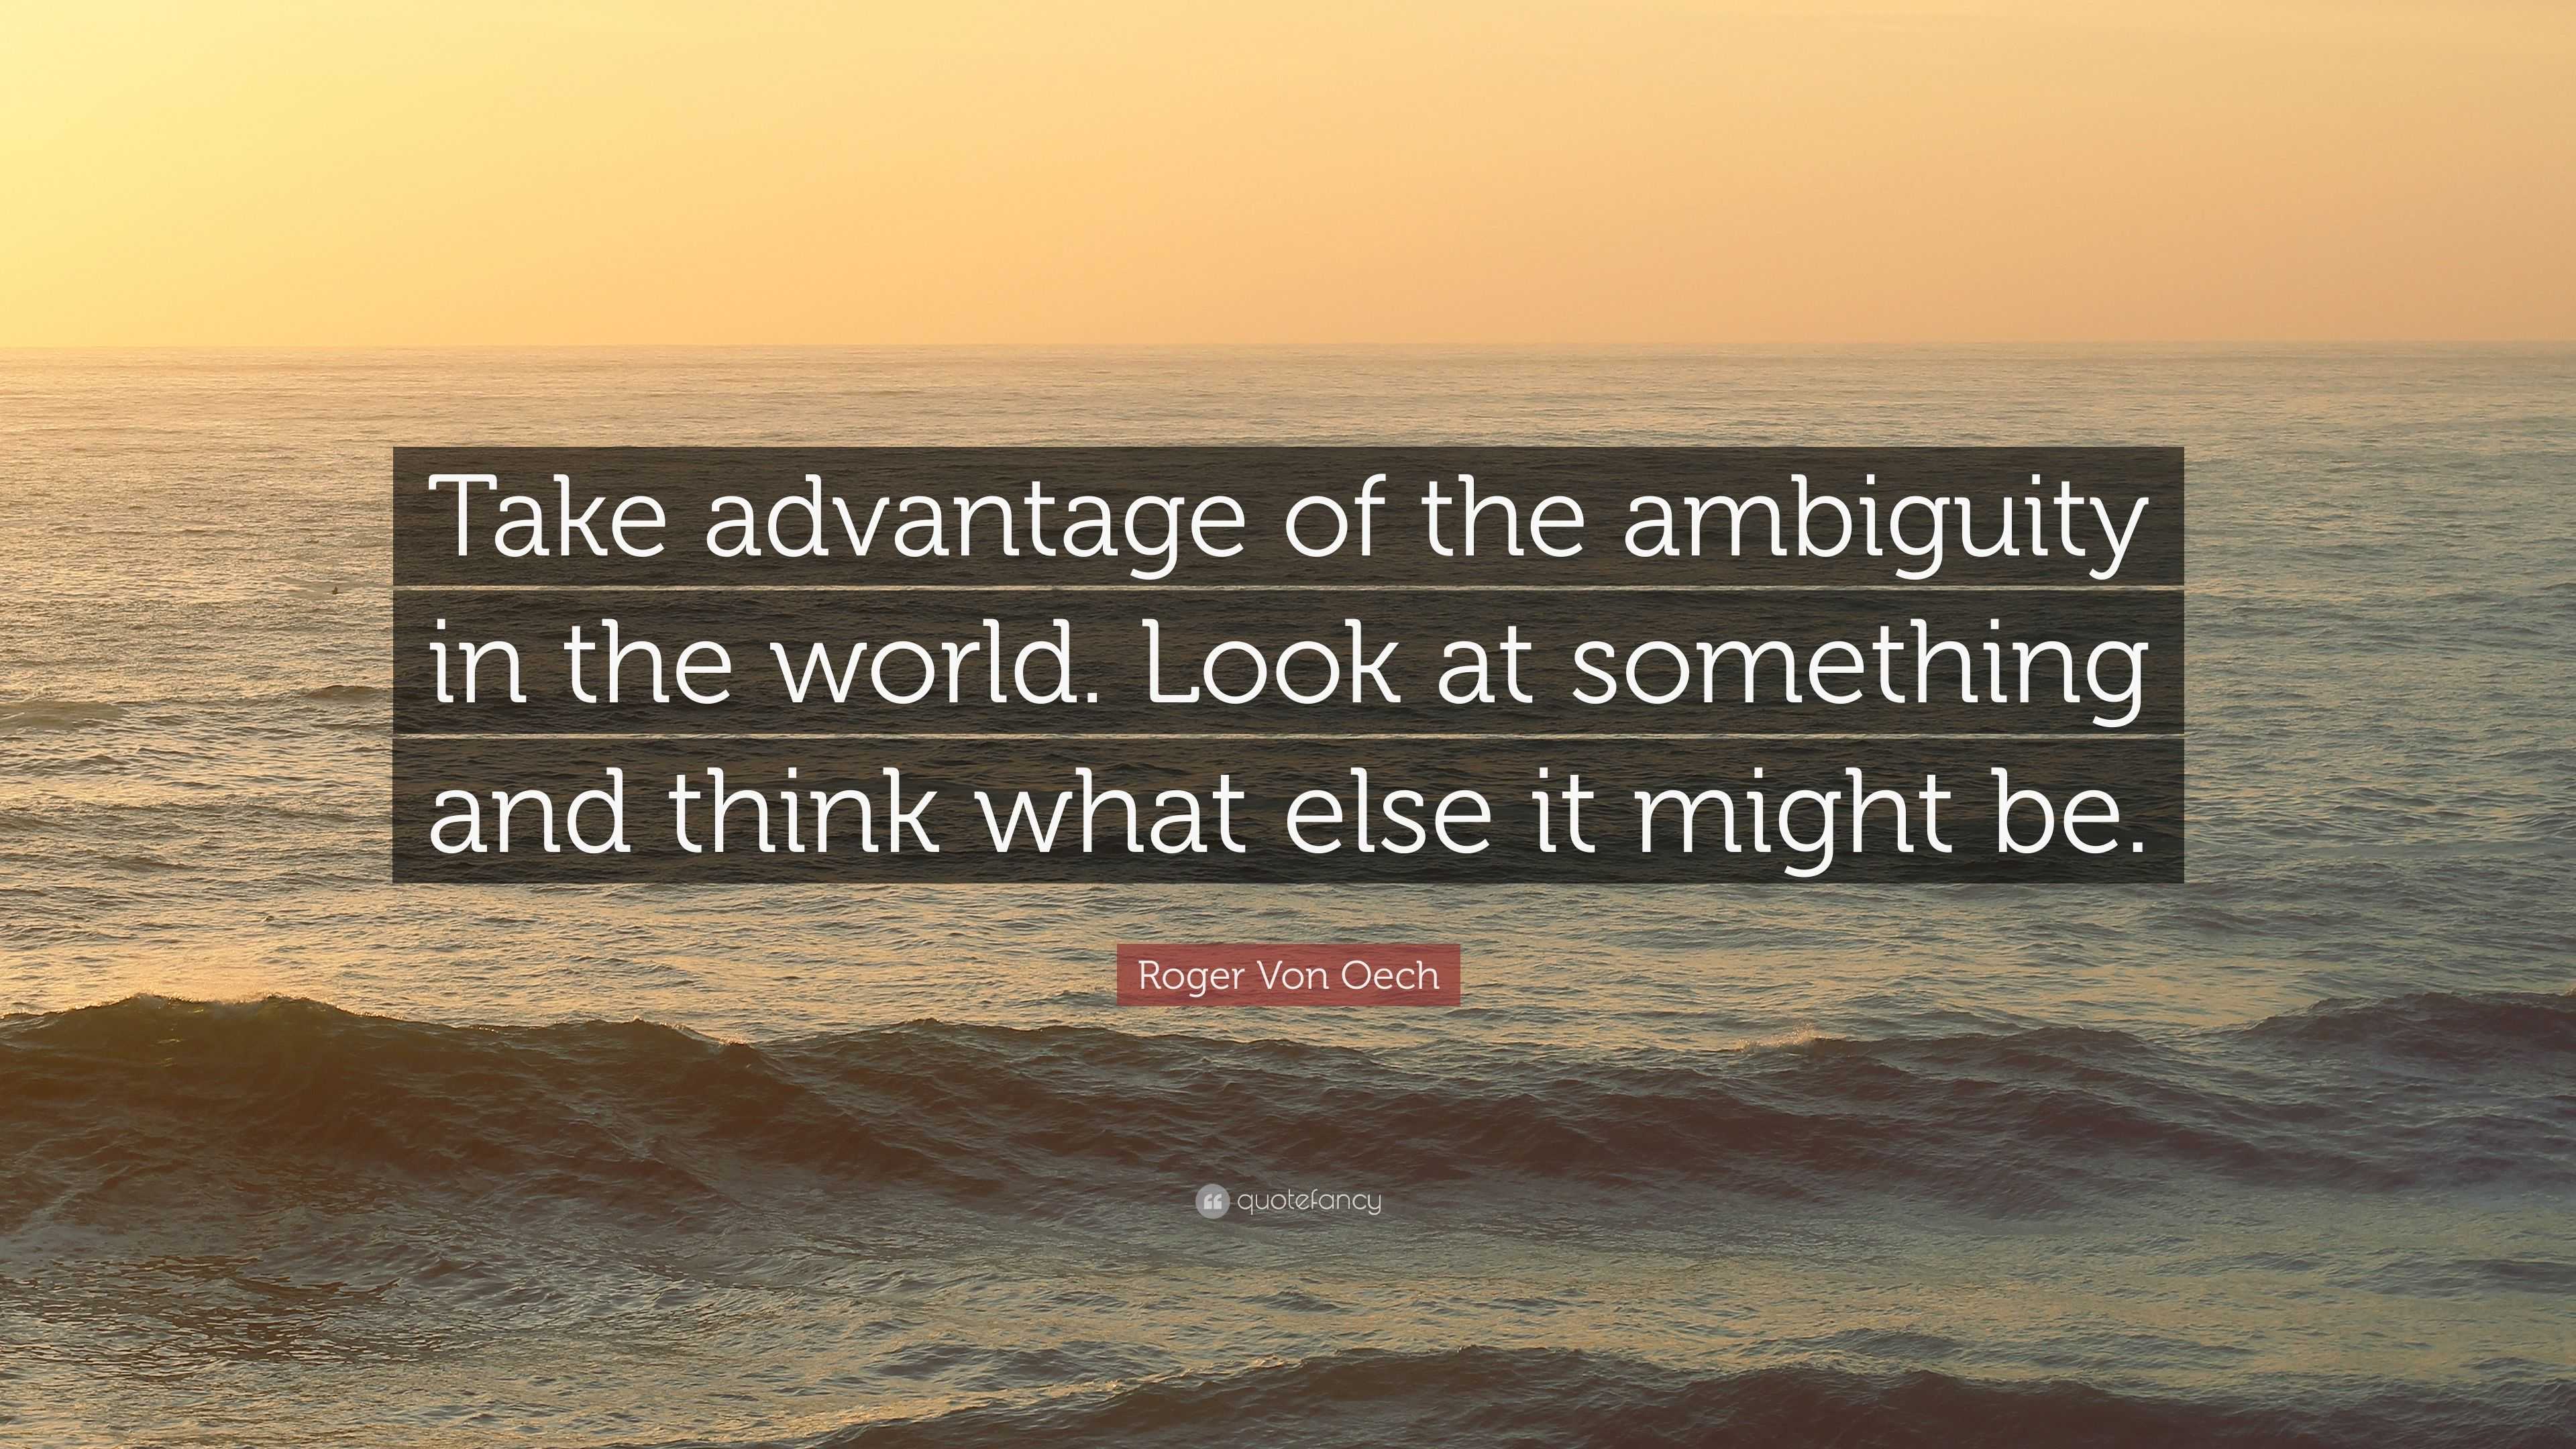 Roger Von Oech Quote: “Take advantage of the ambiguity in the world ...